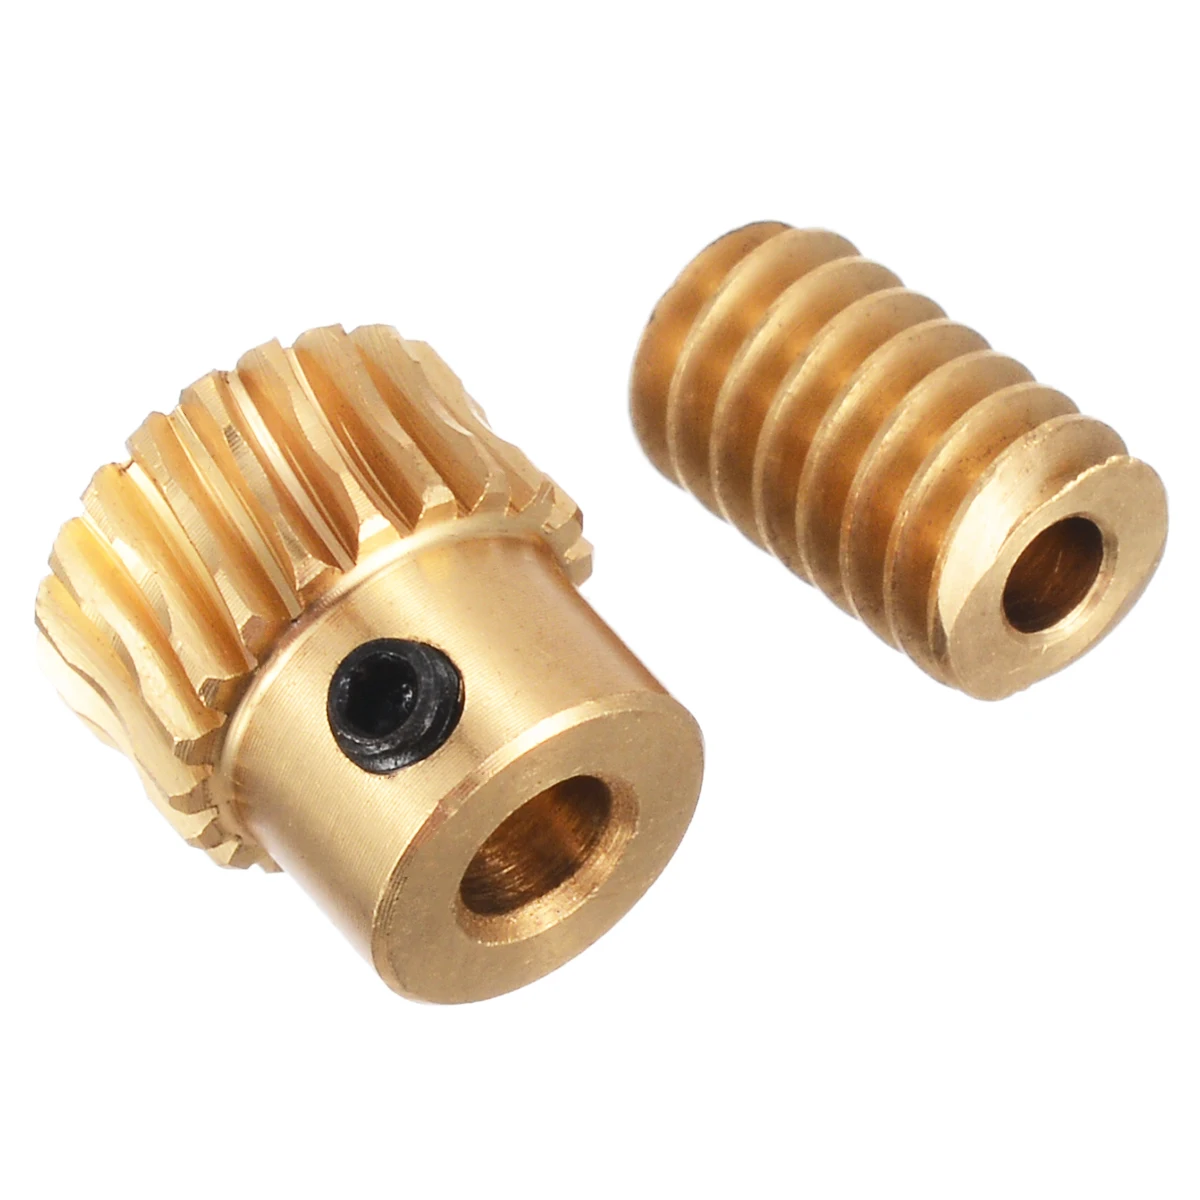 

1 Set 0.5 Modulus 1:10 Reduction Ratio Gear Gold Motor Output Brass Worm Wheel with Worm Shaft